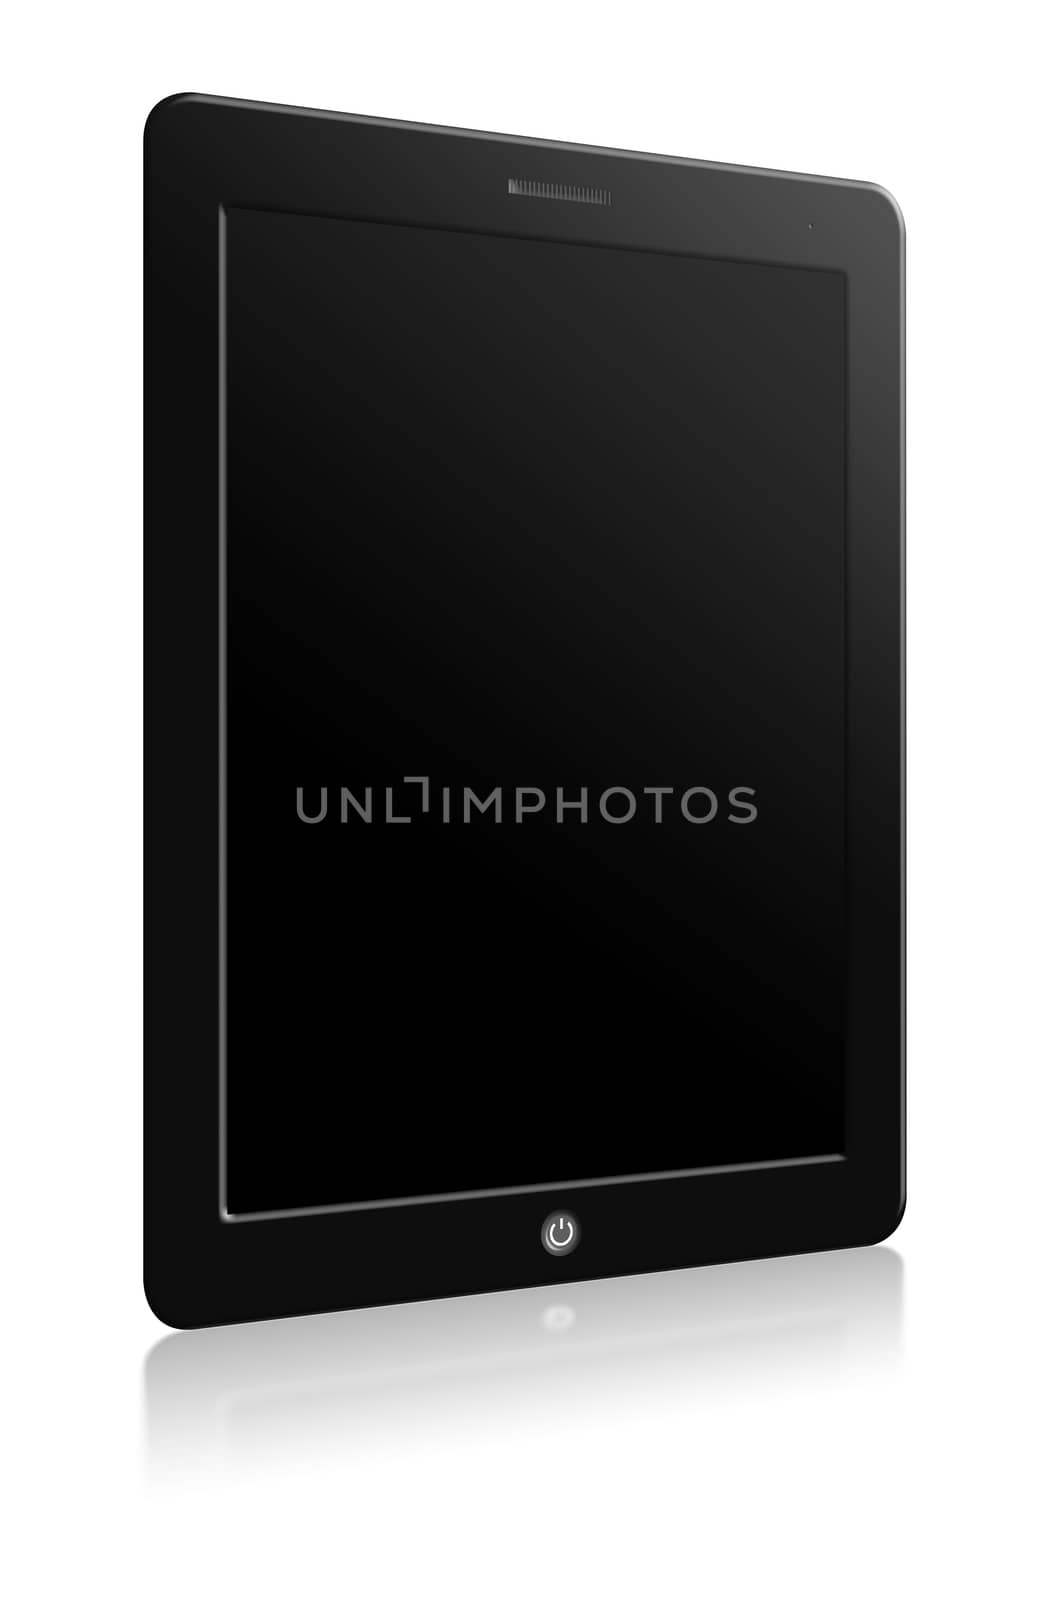 Illustration of modern computer tablet with blank screen. Black background